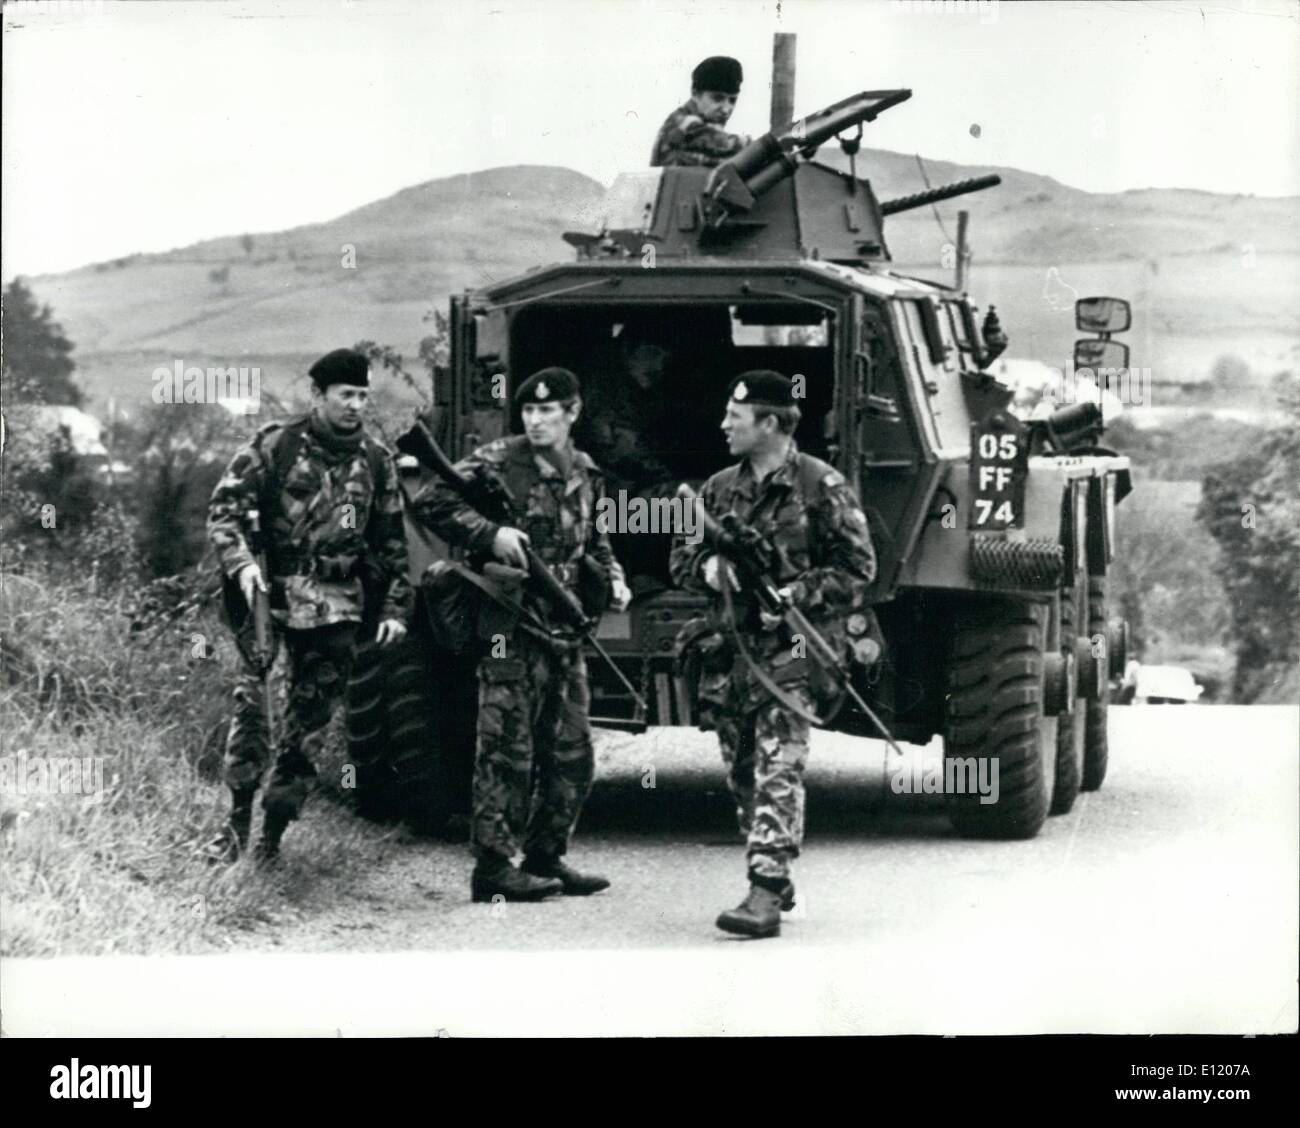 May 05, 1981 - Five soldiers killed in 1,000 bomb blast in Newey; The provisional Ira killed five members of the First Battalion of the Royal Green Jacket when their Saracan armoured personal carrier was blown to places by a bomb planted on a road between Newry and Carlough just four miles from the home of H block hunger striker, the third, Raymond McCreesh, 25, who is near death after 59 days of his fast, Wreckage fro mthe 10 ton Saracan car was hurled over 300 yards as the bomb was detonated by the assasins hidden in a wooden hillside Stock Photo